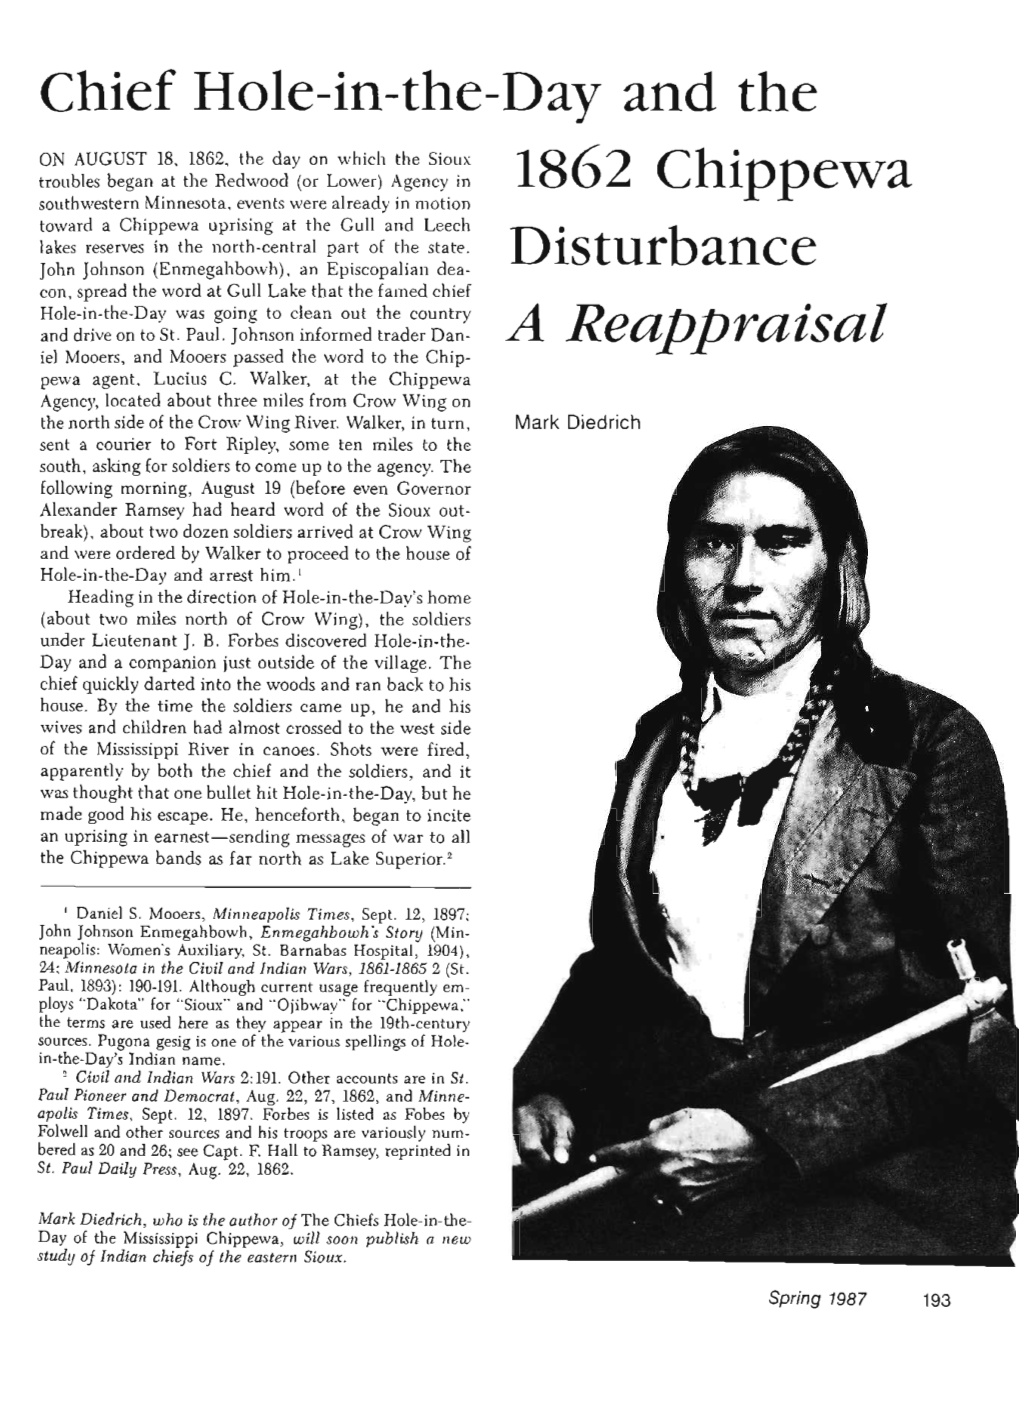 Chief Hole-In-The-Day and the 1862 Chippewa Disturbance